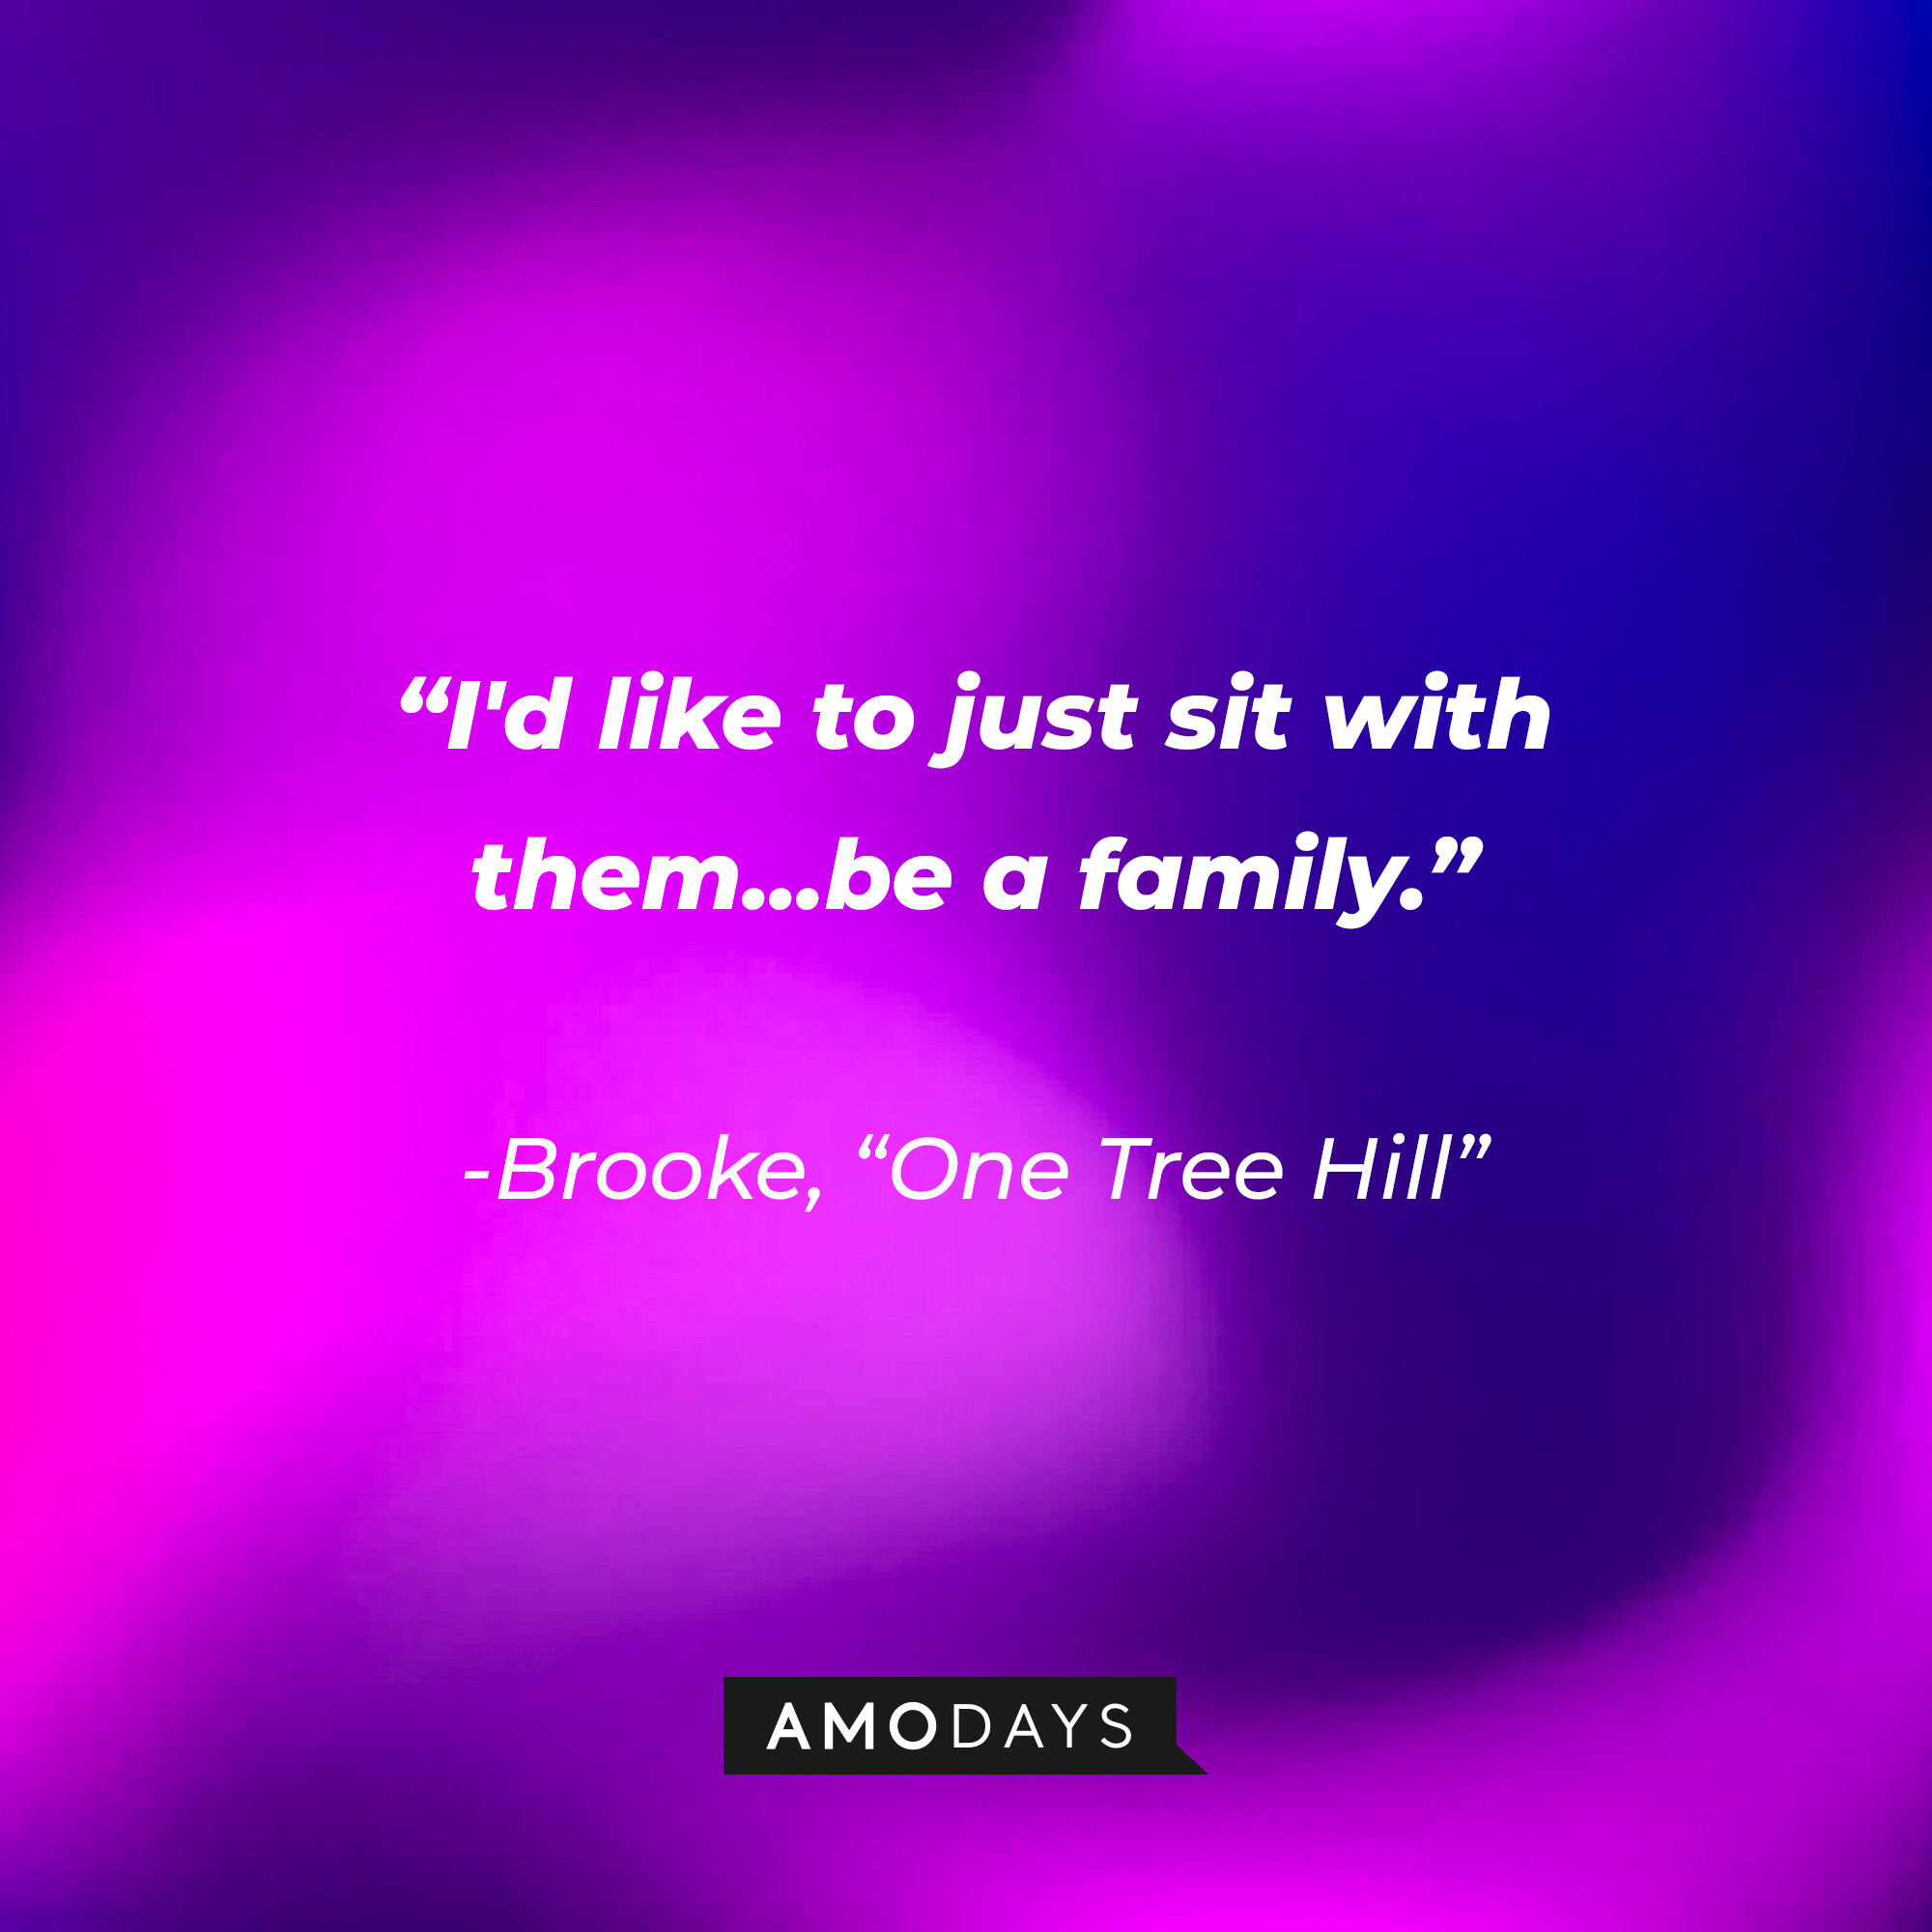 Brooke’s quote from “One Tree Hill”: “I'd like to just sit with them...be a family.” | Source: AmoDays